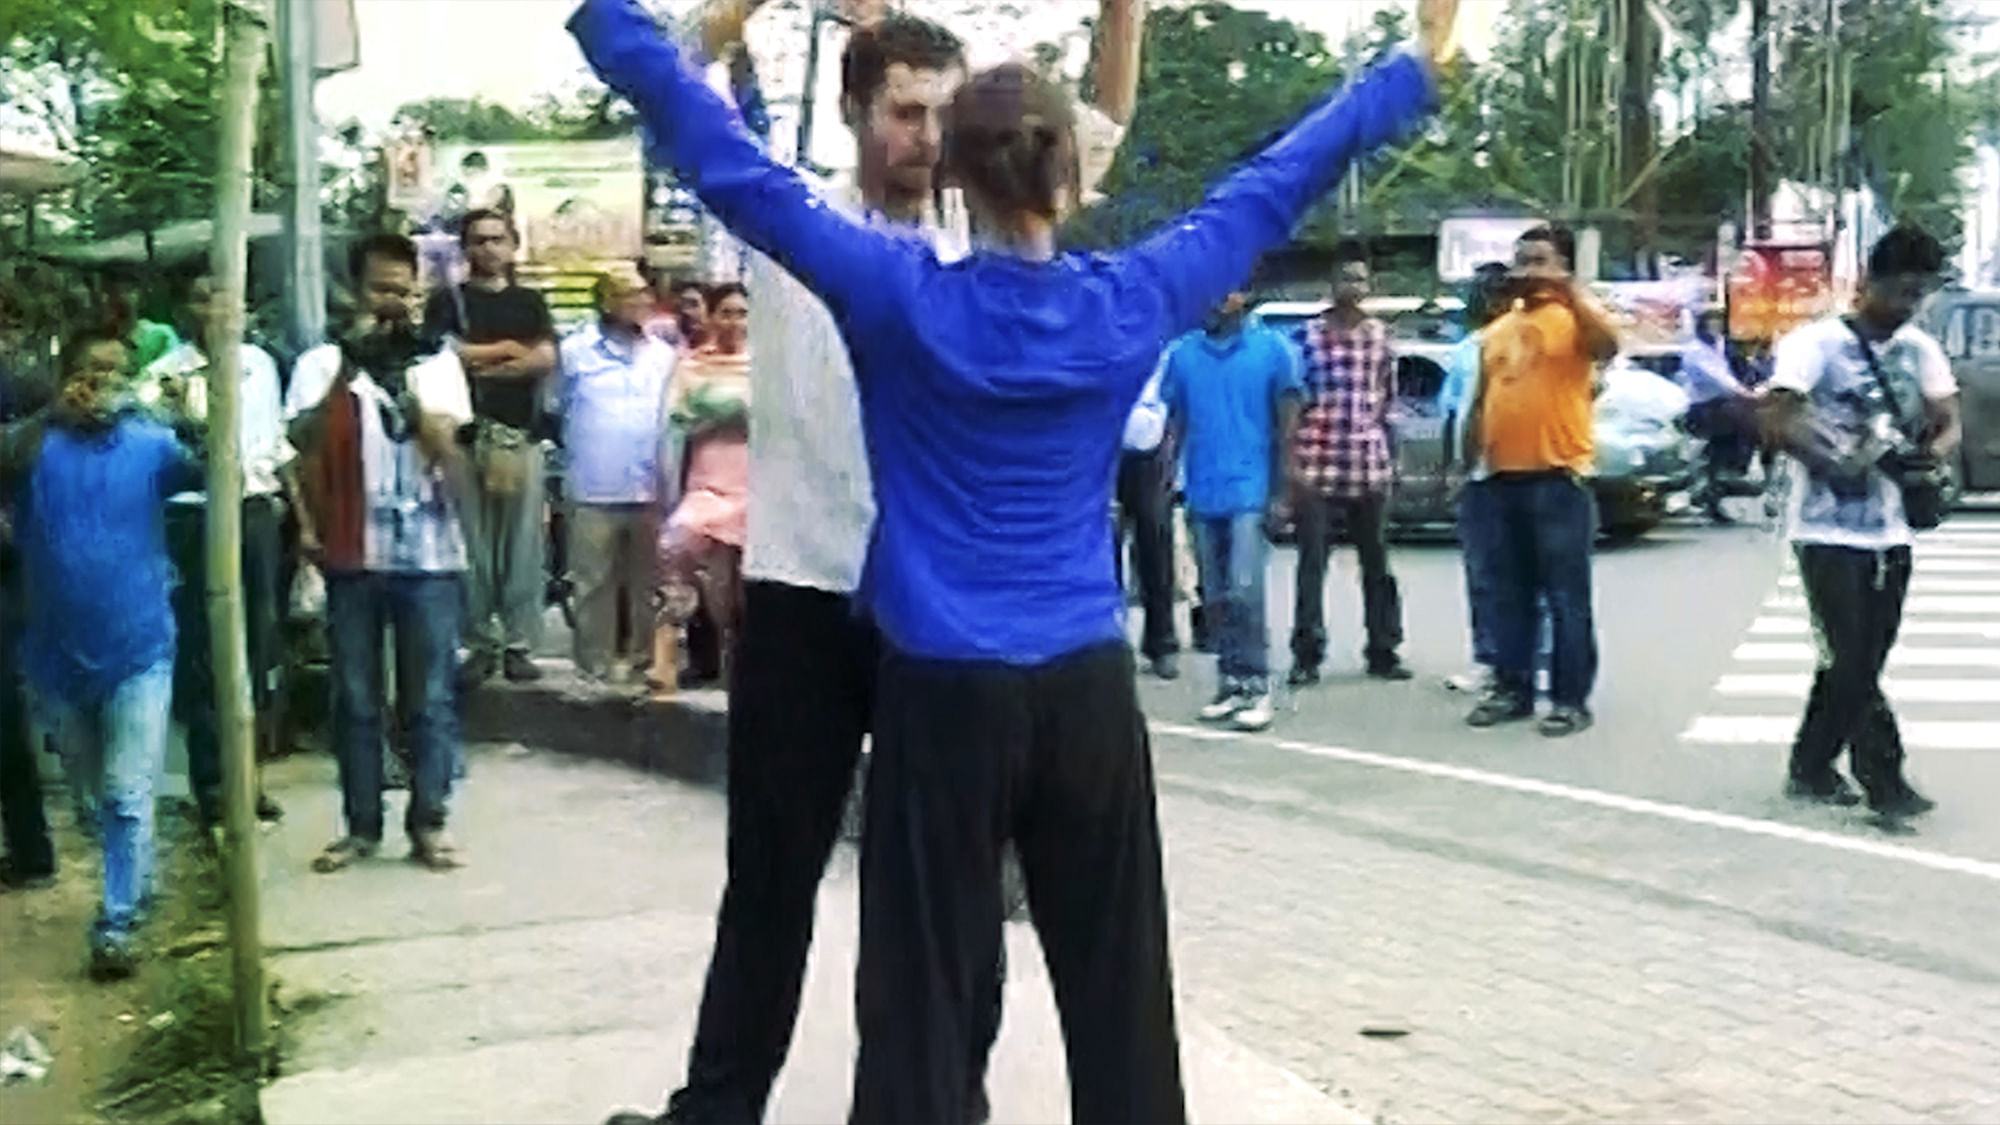 Jennifer and Gregory are French dancers travelling around the world on a ten month journey with their project ‘Cross Dancers’. (Photo: ANI Screengrab)